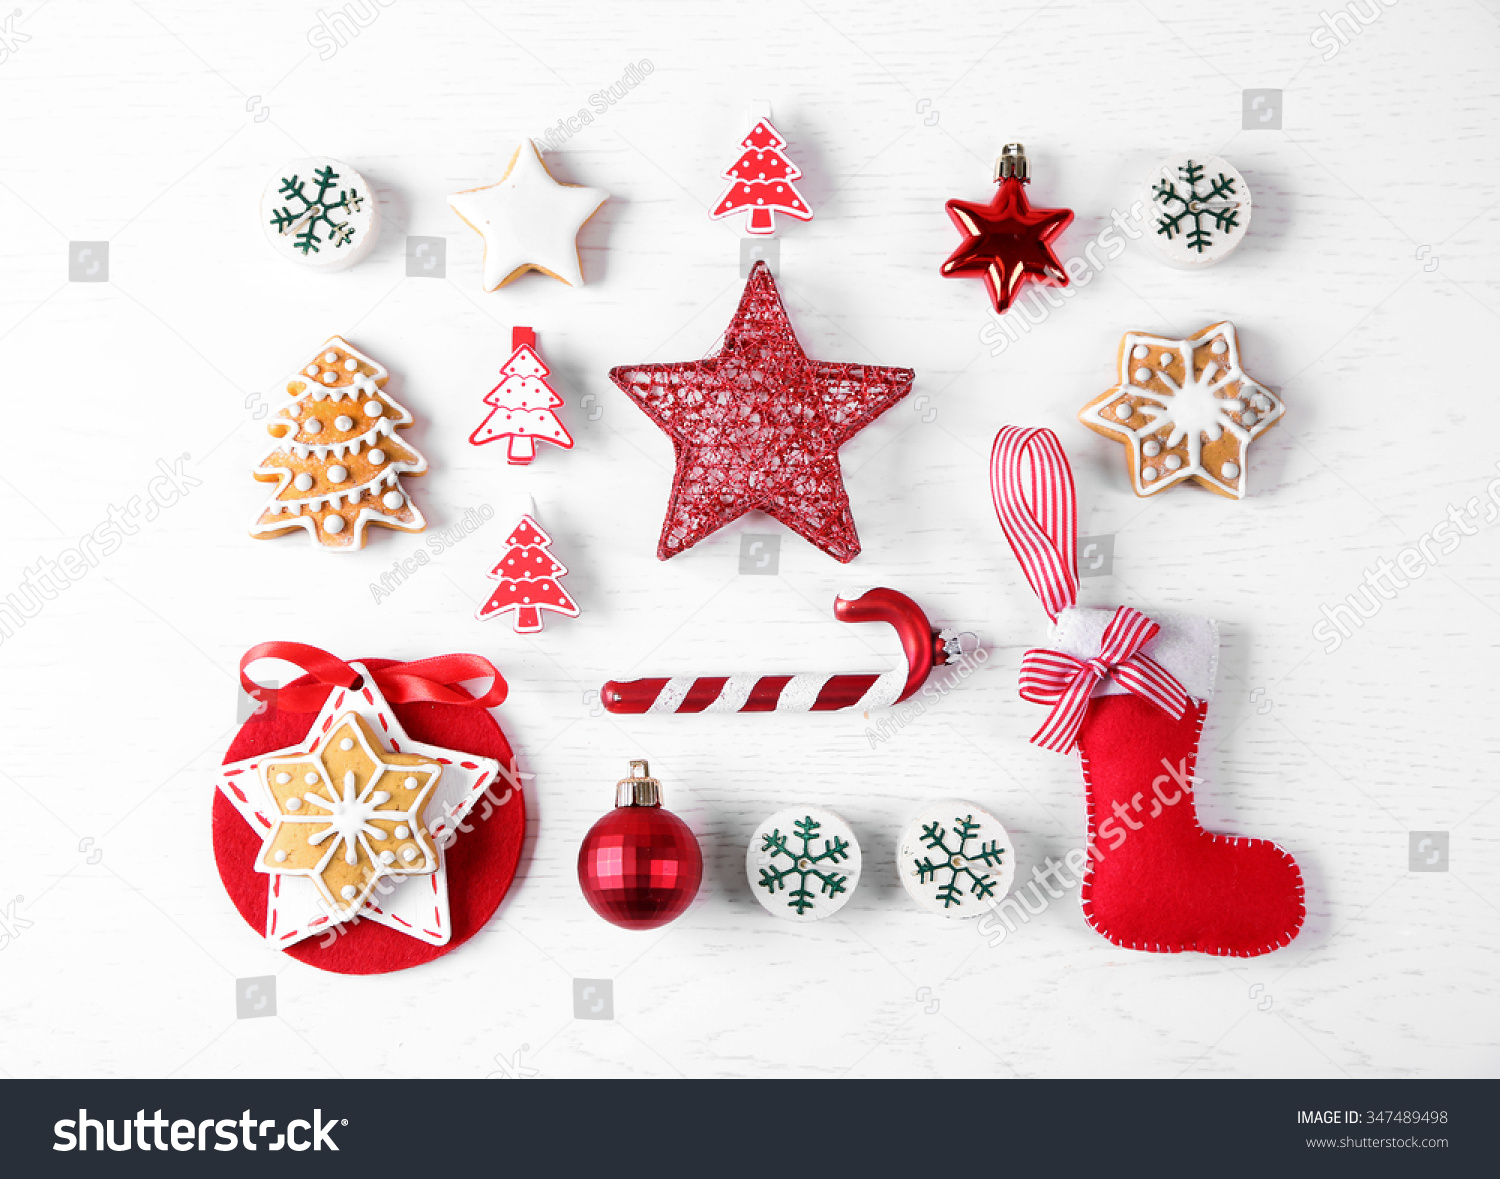 Christmas decoration collection on wooden table top view #347489498